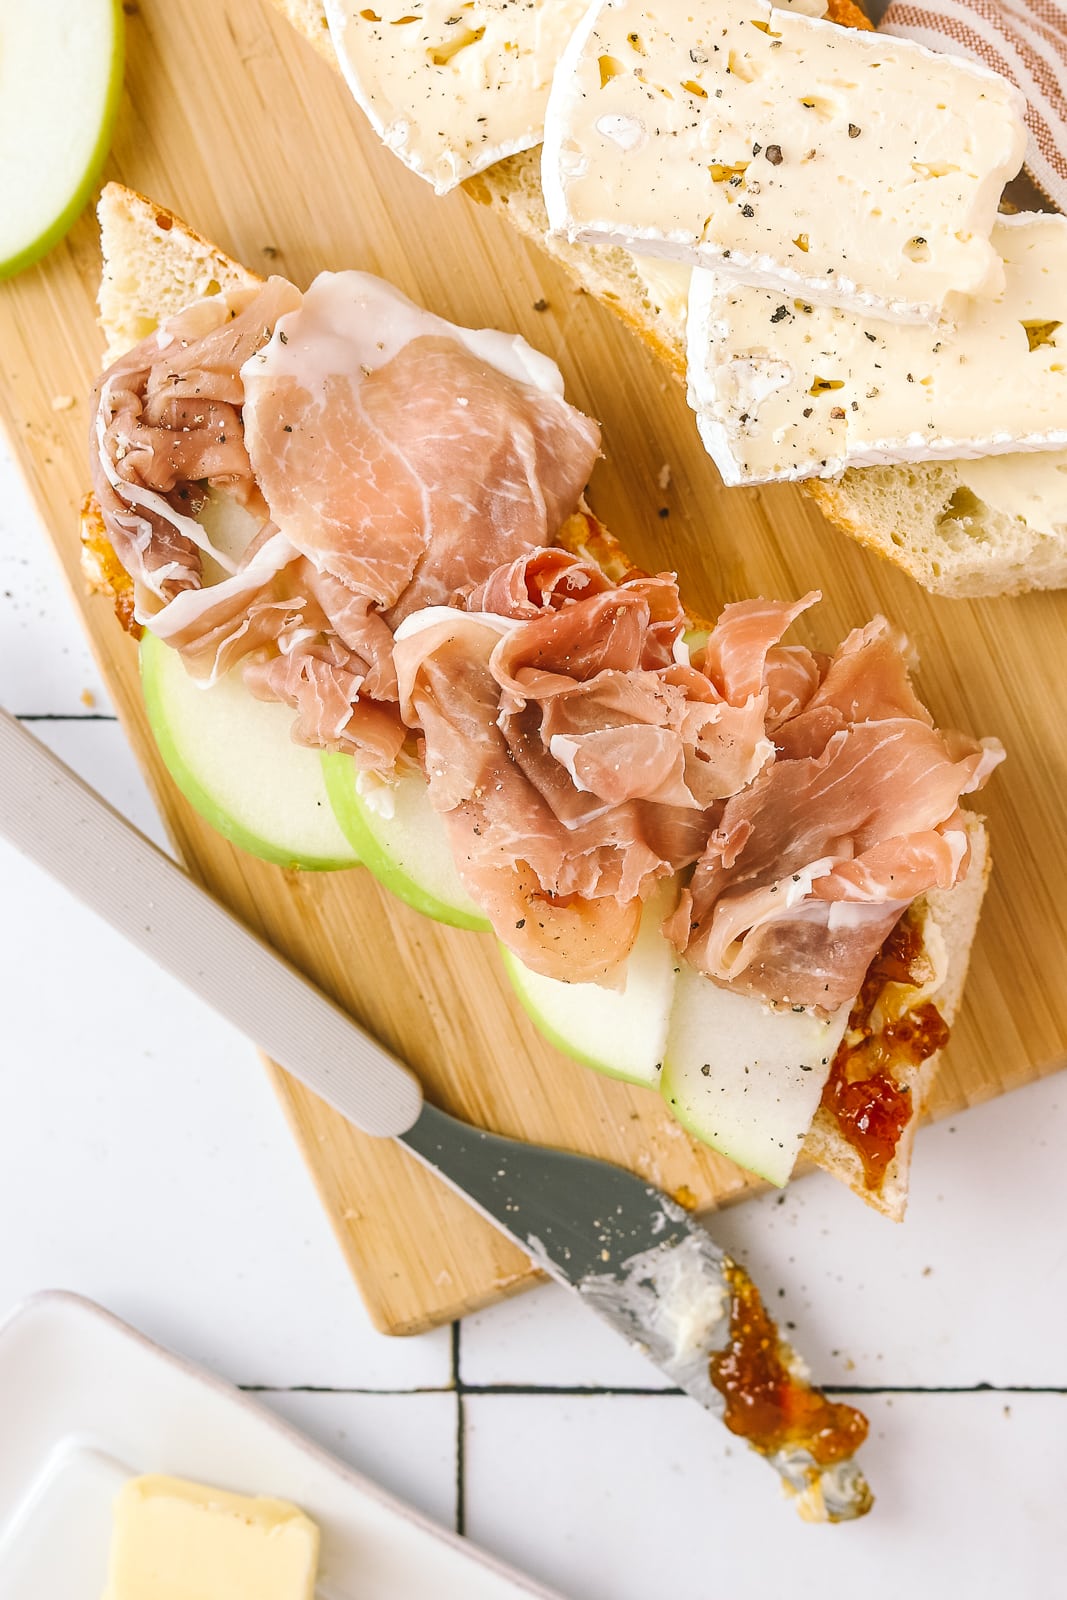 prosciutto and apple on a baguette being made on a cutting board